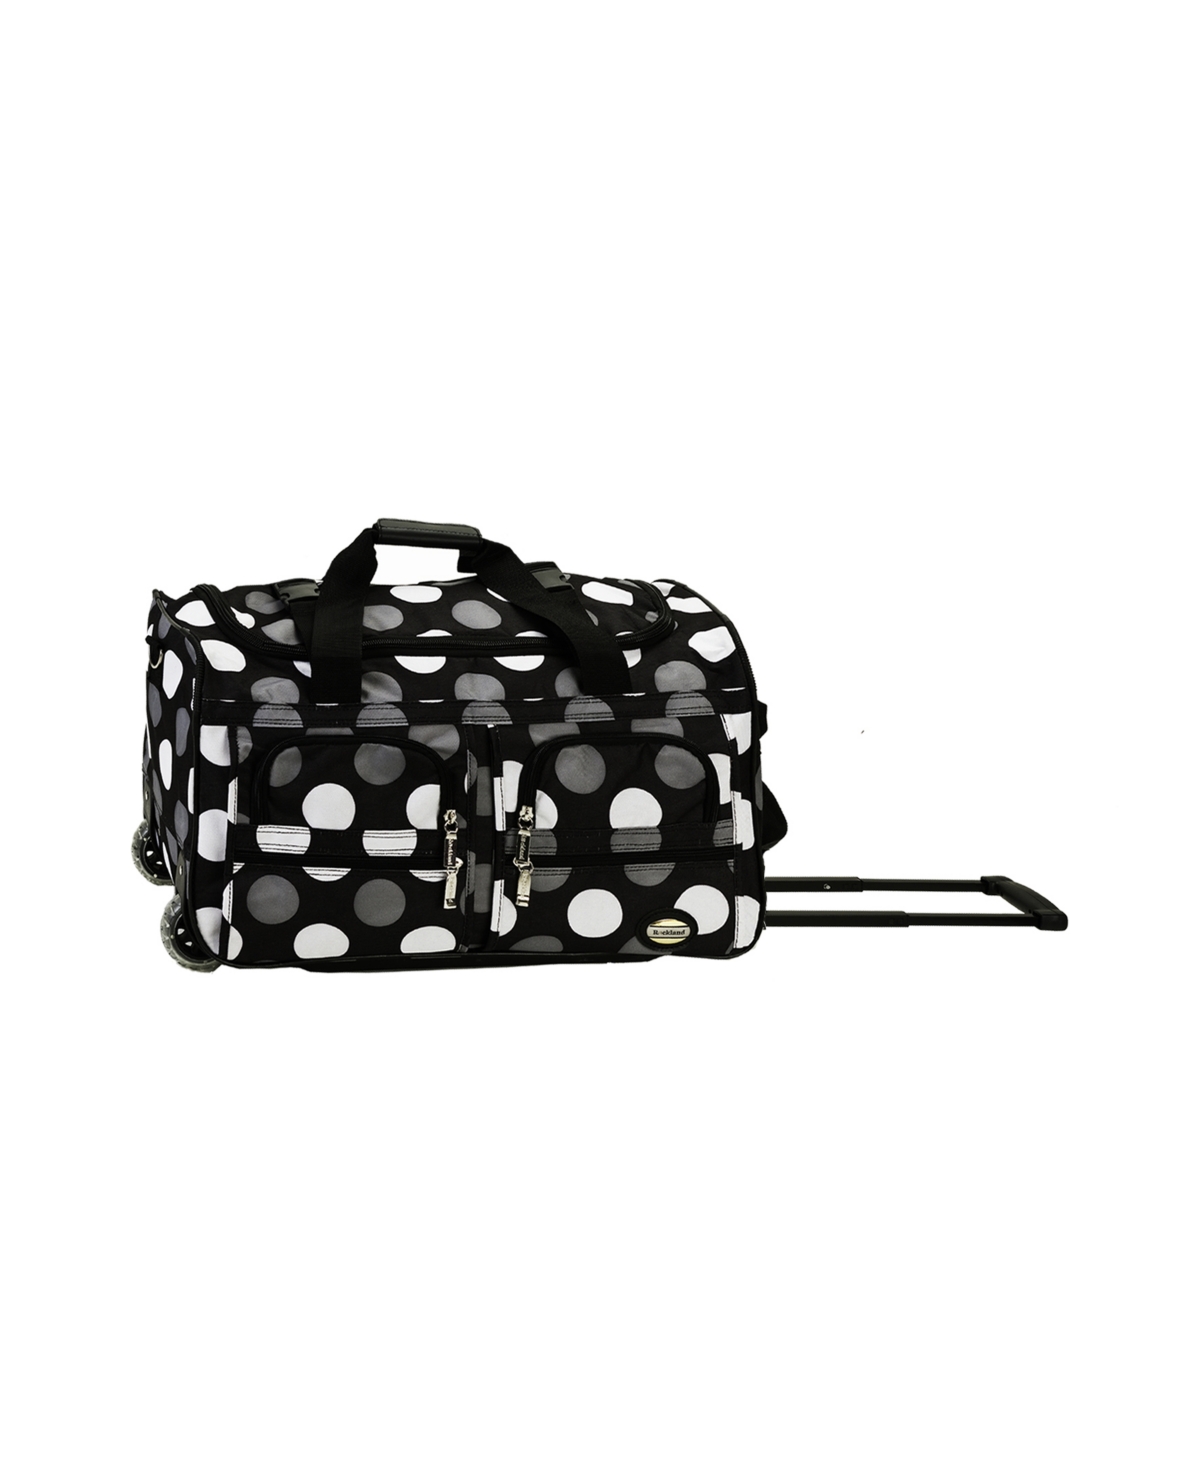 Rockland 22" Carry-on Rolling Duffle Bag In White  Grey Dots